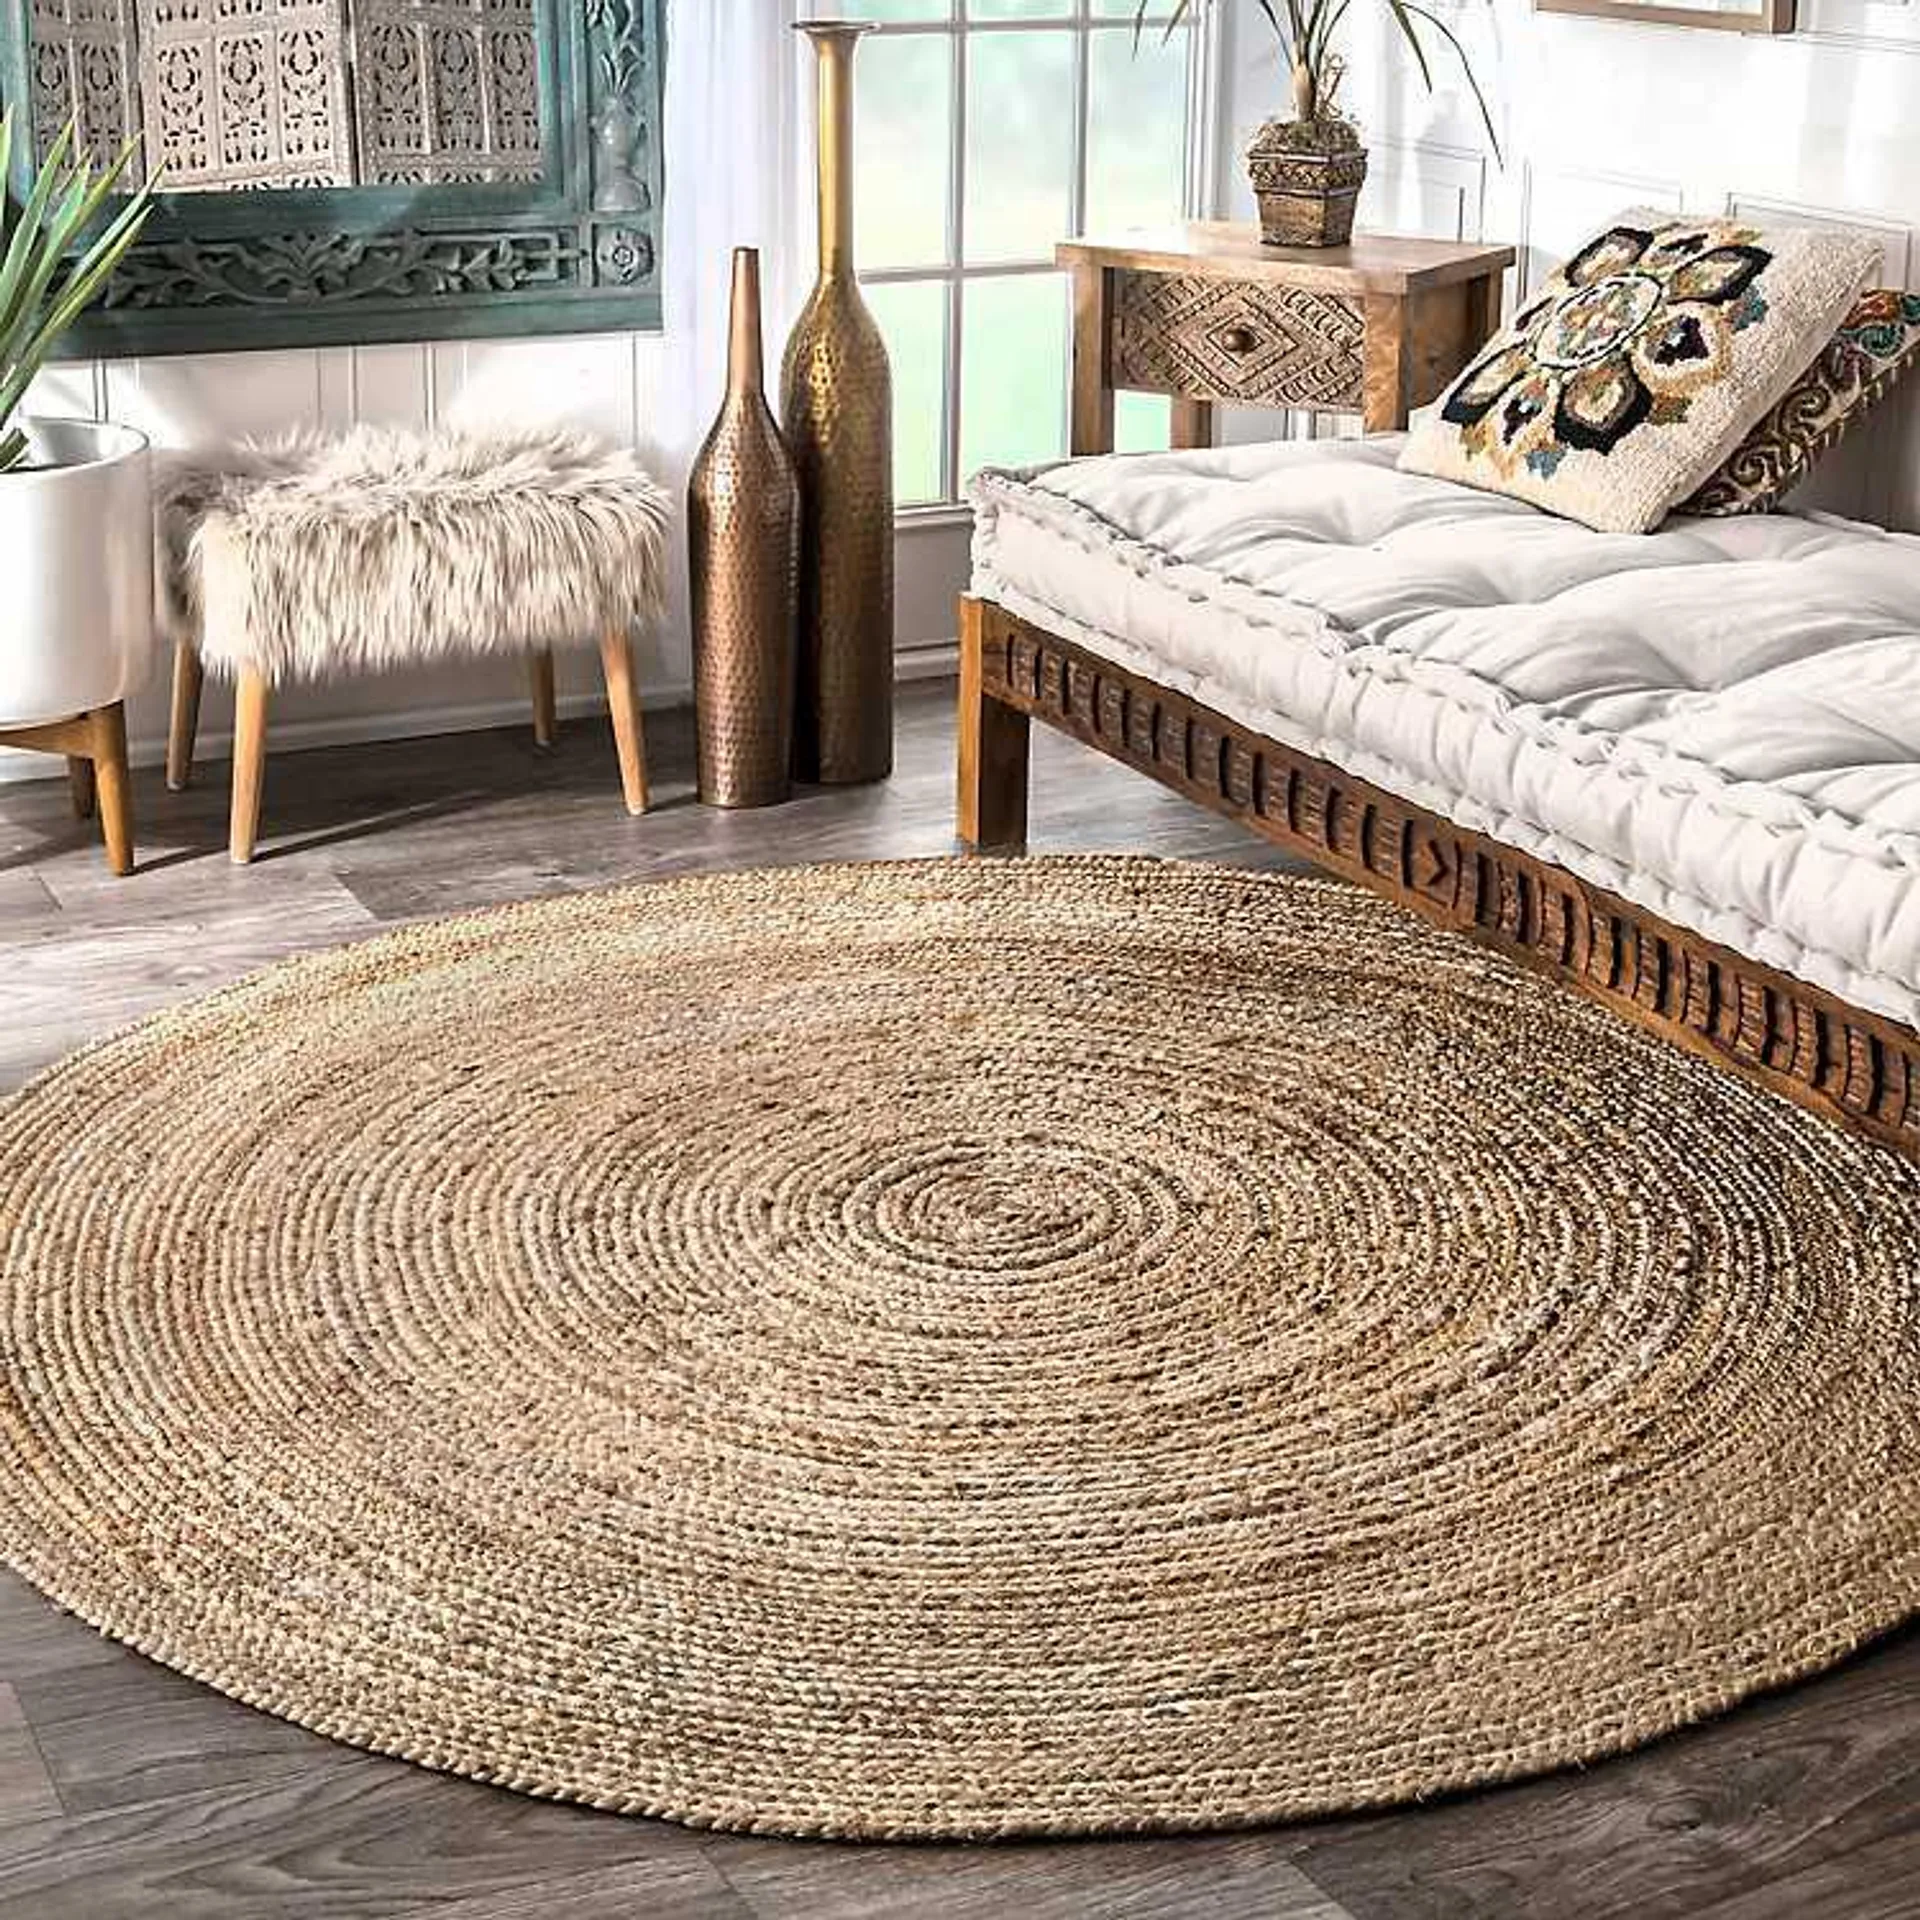 Natural Reno Woven Round Area Rug, 4 ft.